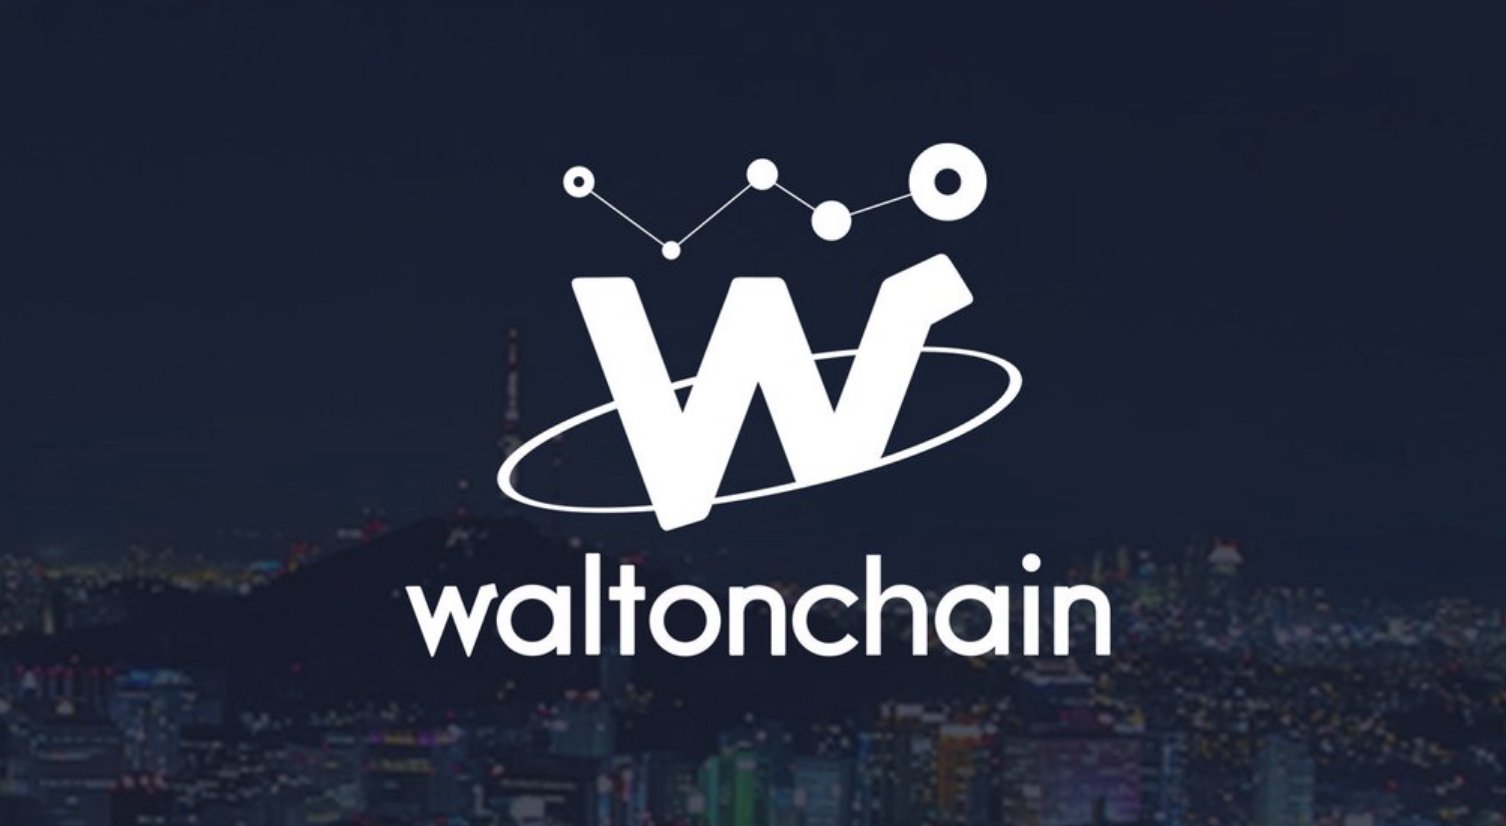  waltonchain solutions traceability wtc scandal china free 